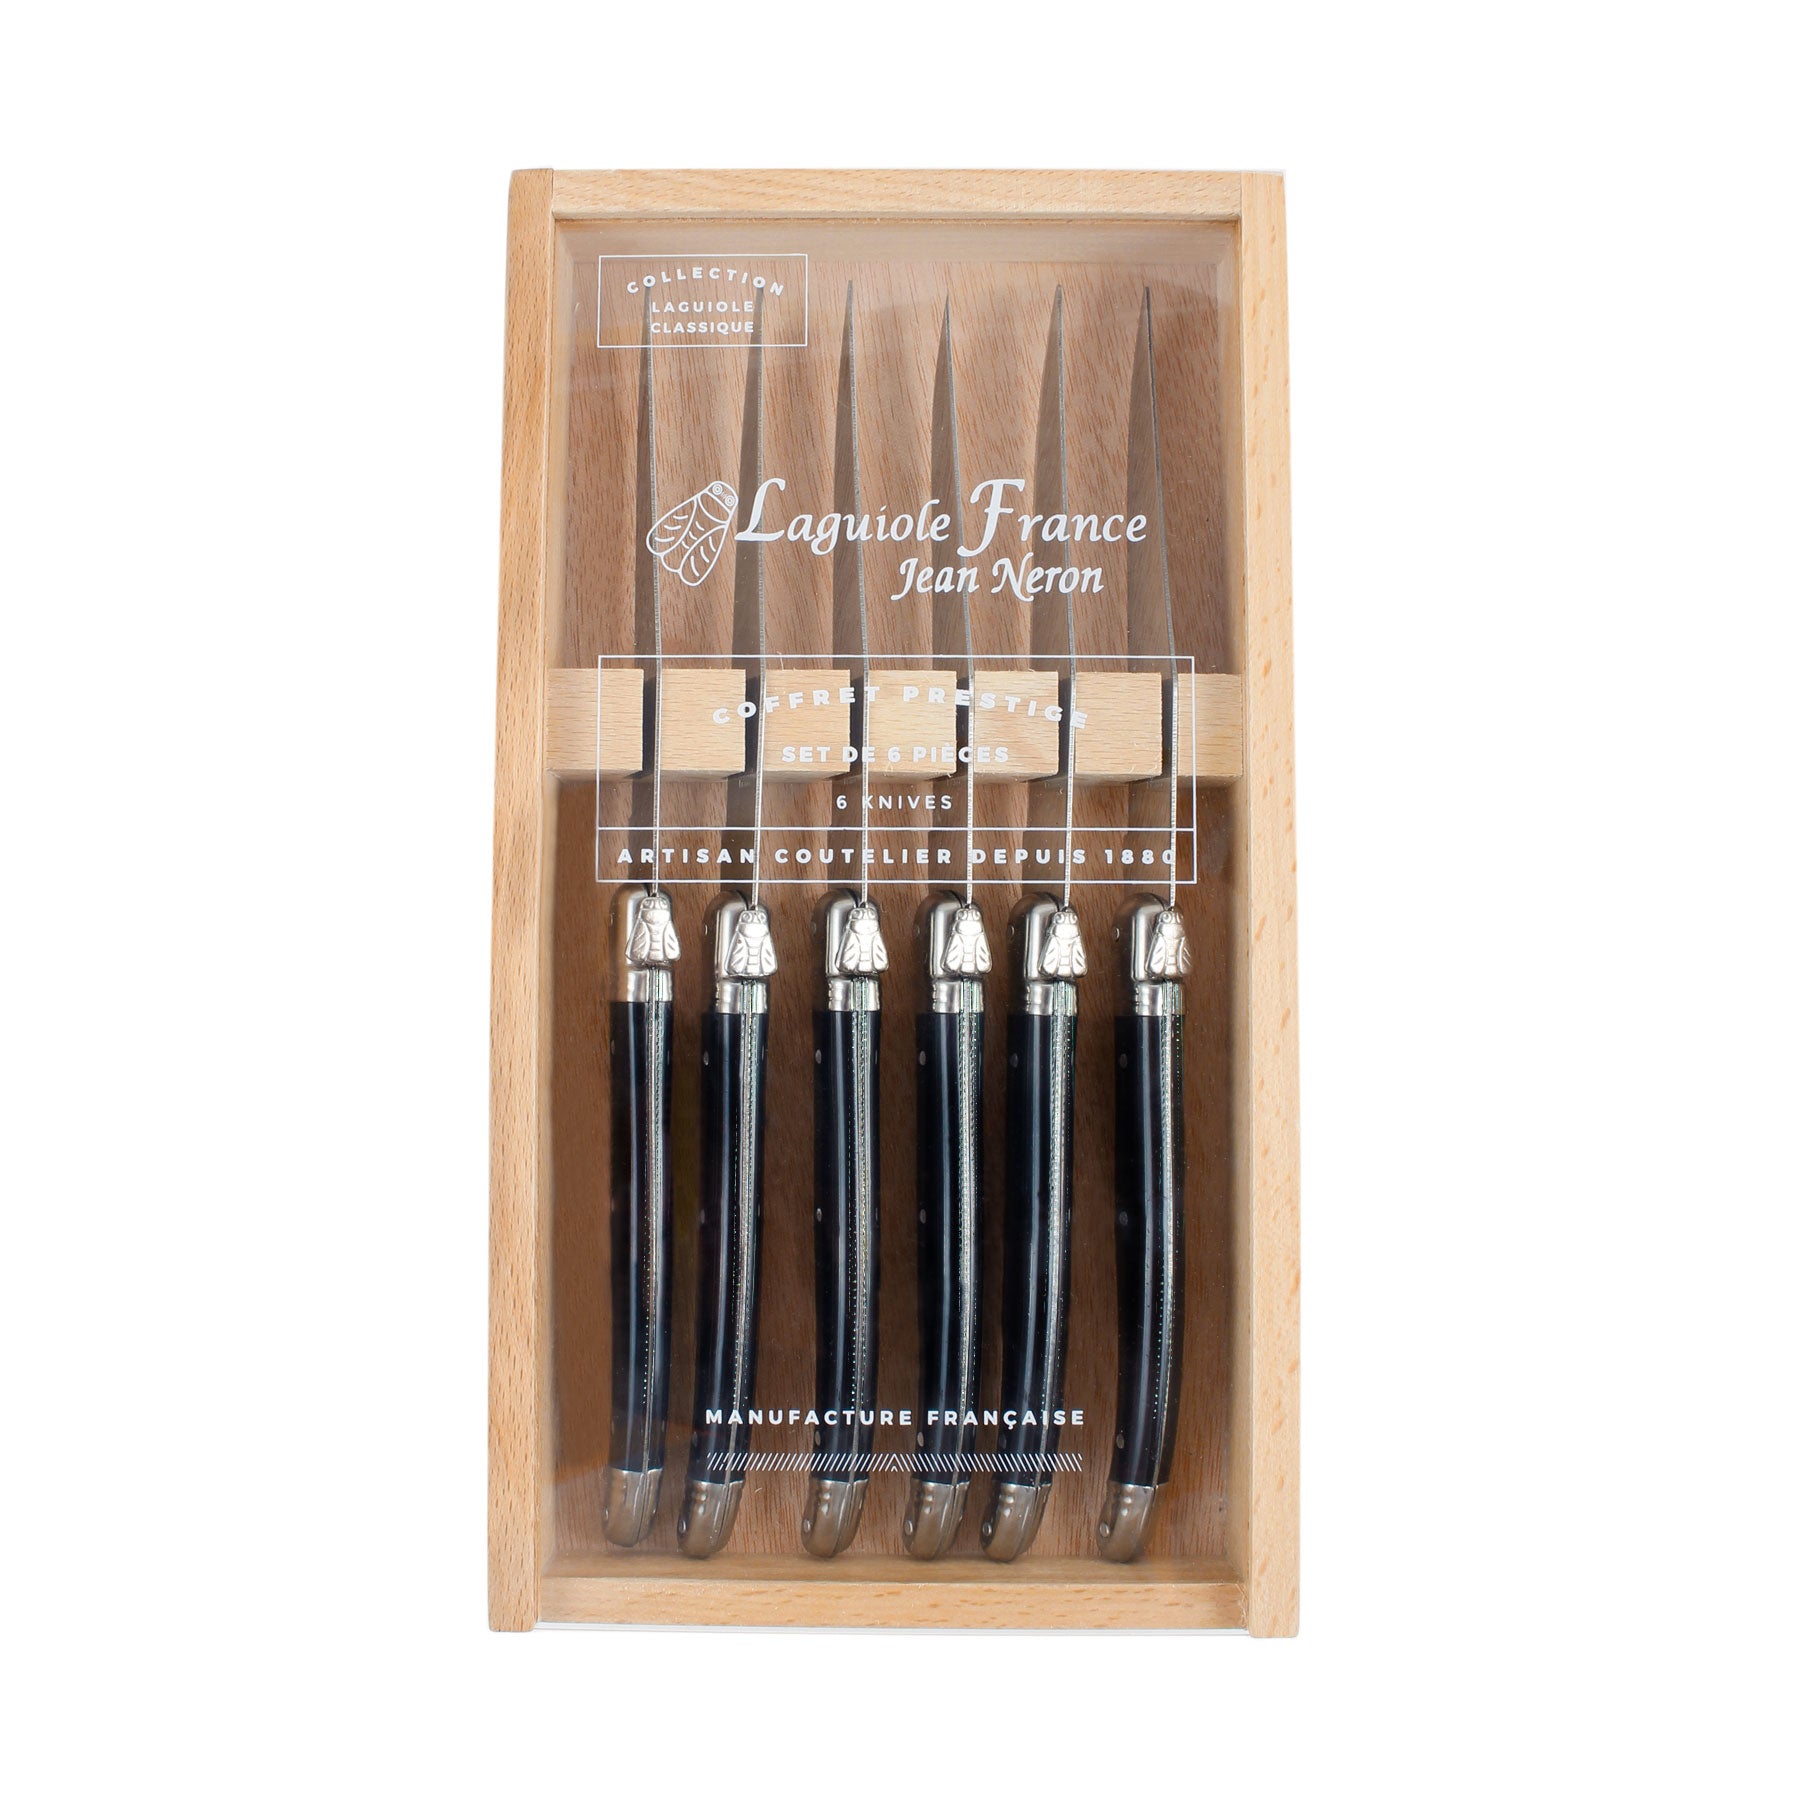 Laguiole Black Platine Knives in Wooden Box with Acrylic Lid (Set of 6) Cutlery Laguiole Brand_Laguiole Kitchen_Dinnerware Kitchen_Kitchenware Knife Sets Laguiole Spring Collection 7900-60540M_BK_AL-Laguiole-Black-Knives-in-Wooden-Box-with-Acrylic-Lid-_Set-of-6__Web_Platine